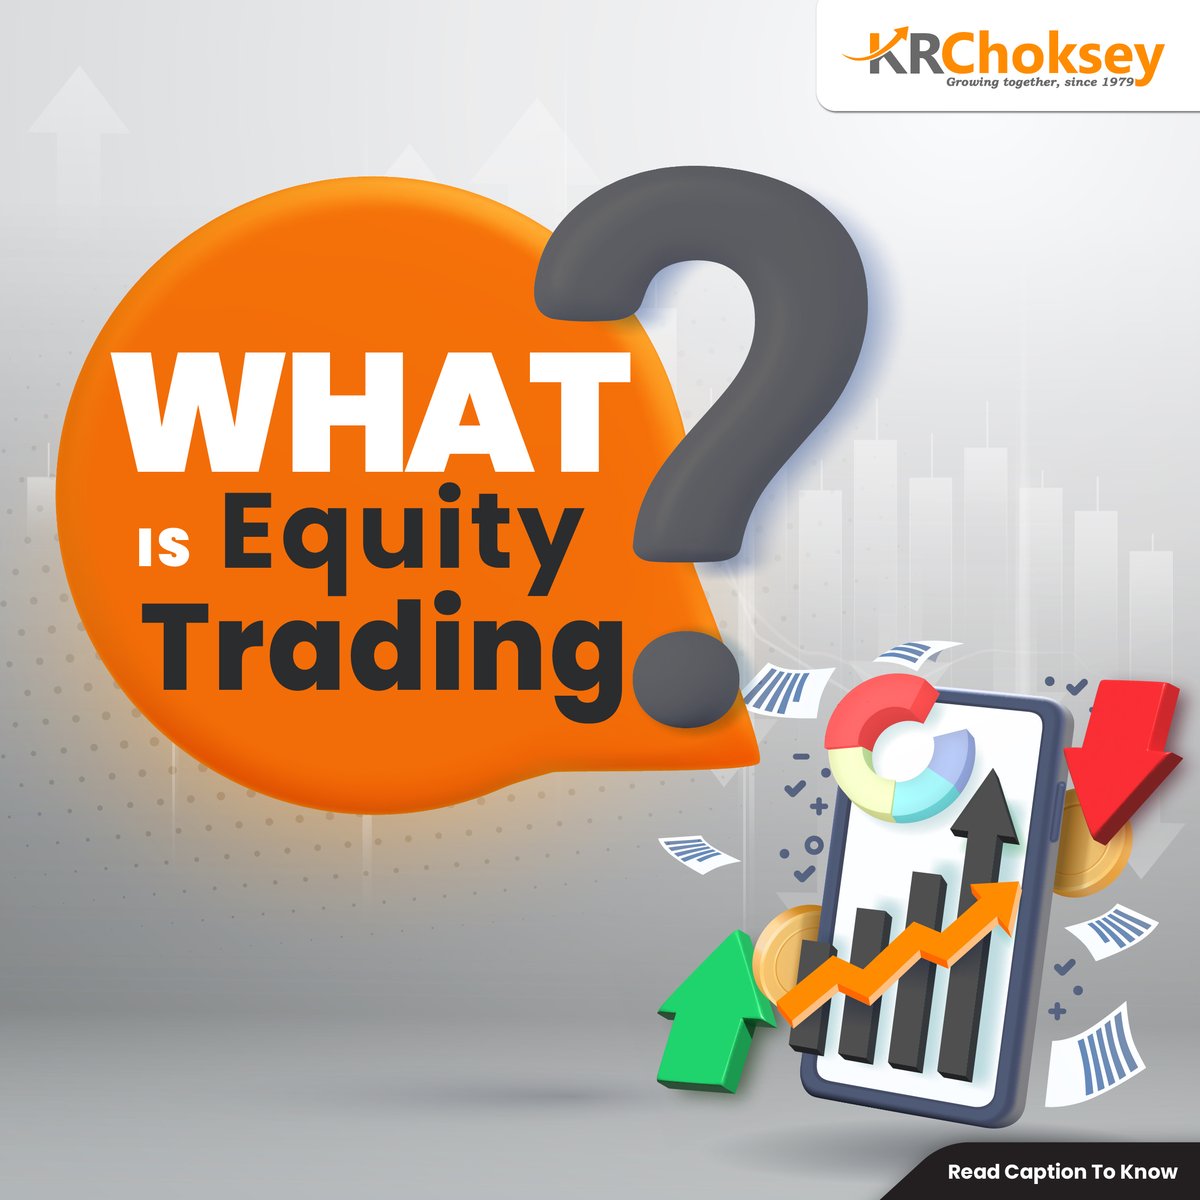 Equity trading involves purchasing and selling ownership shares in publicly listed firms on stock exchanges. This makes you a shareholder, holding a part of the company.

#KRChoksey #finance #equitytrading #equitymarket  #equitytrader #stockmarket  #nse #bse